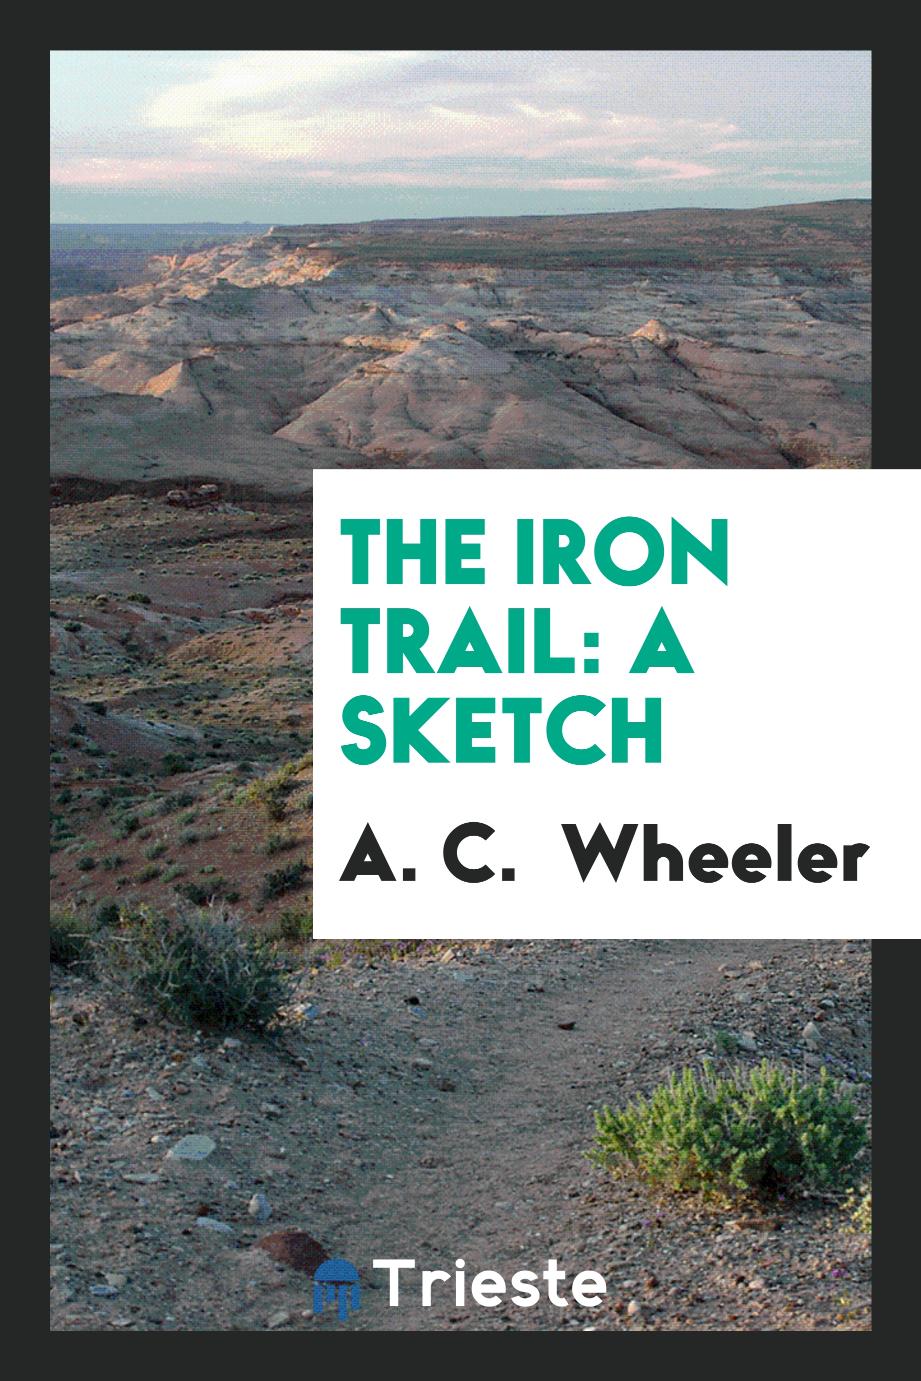 The Iron Trail: A Sketch